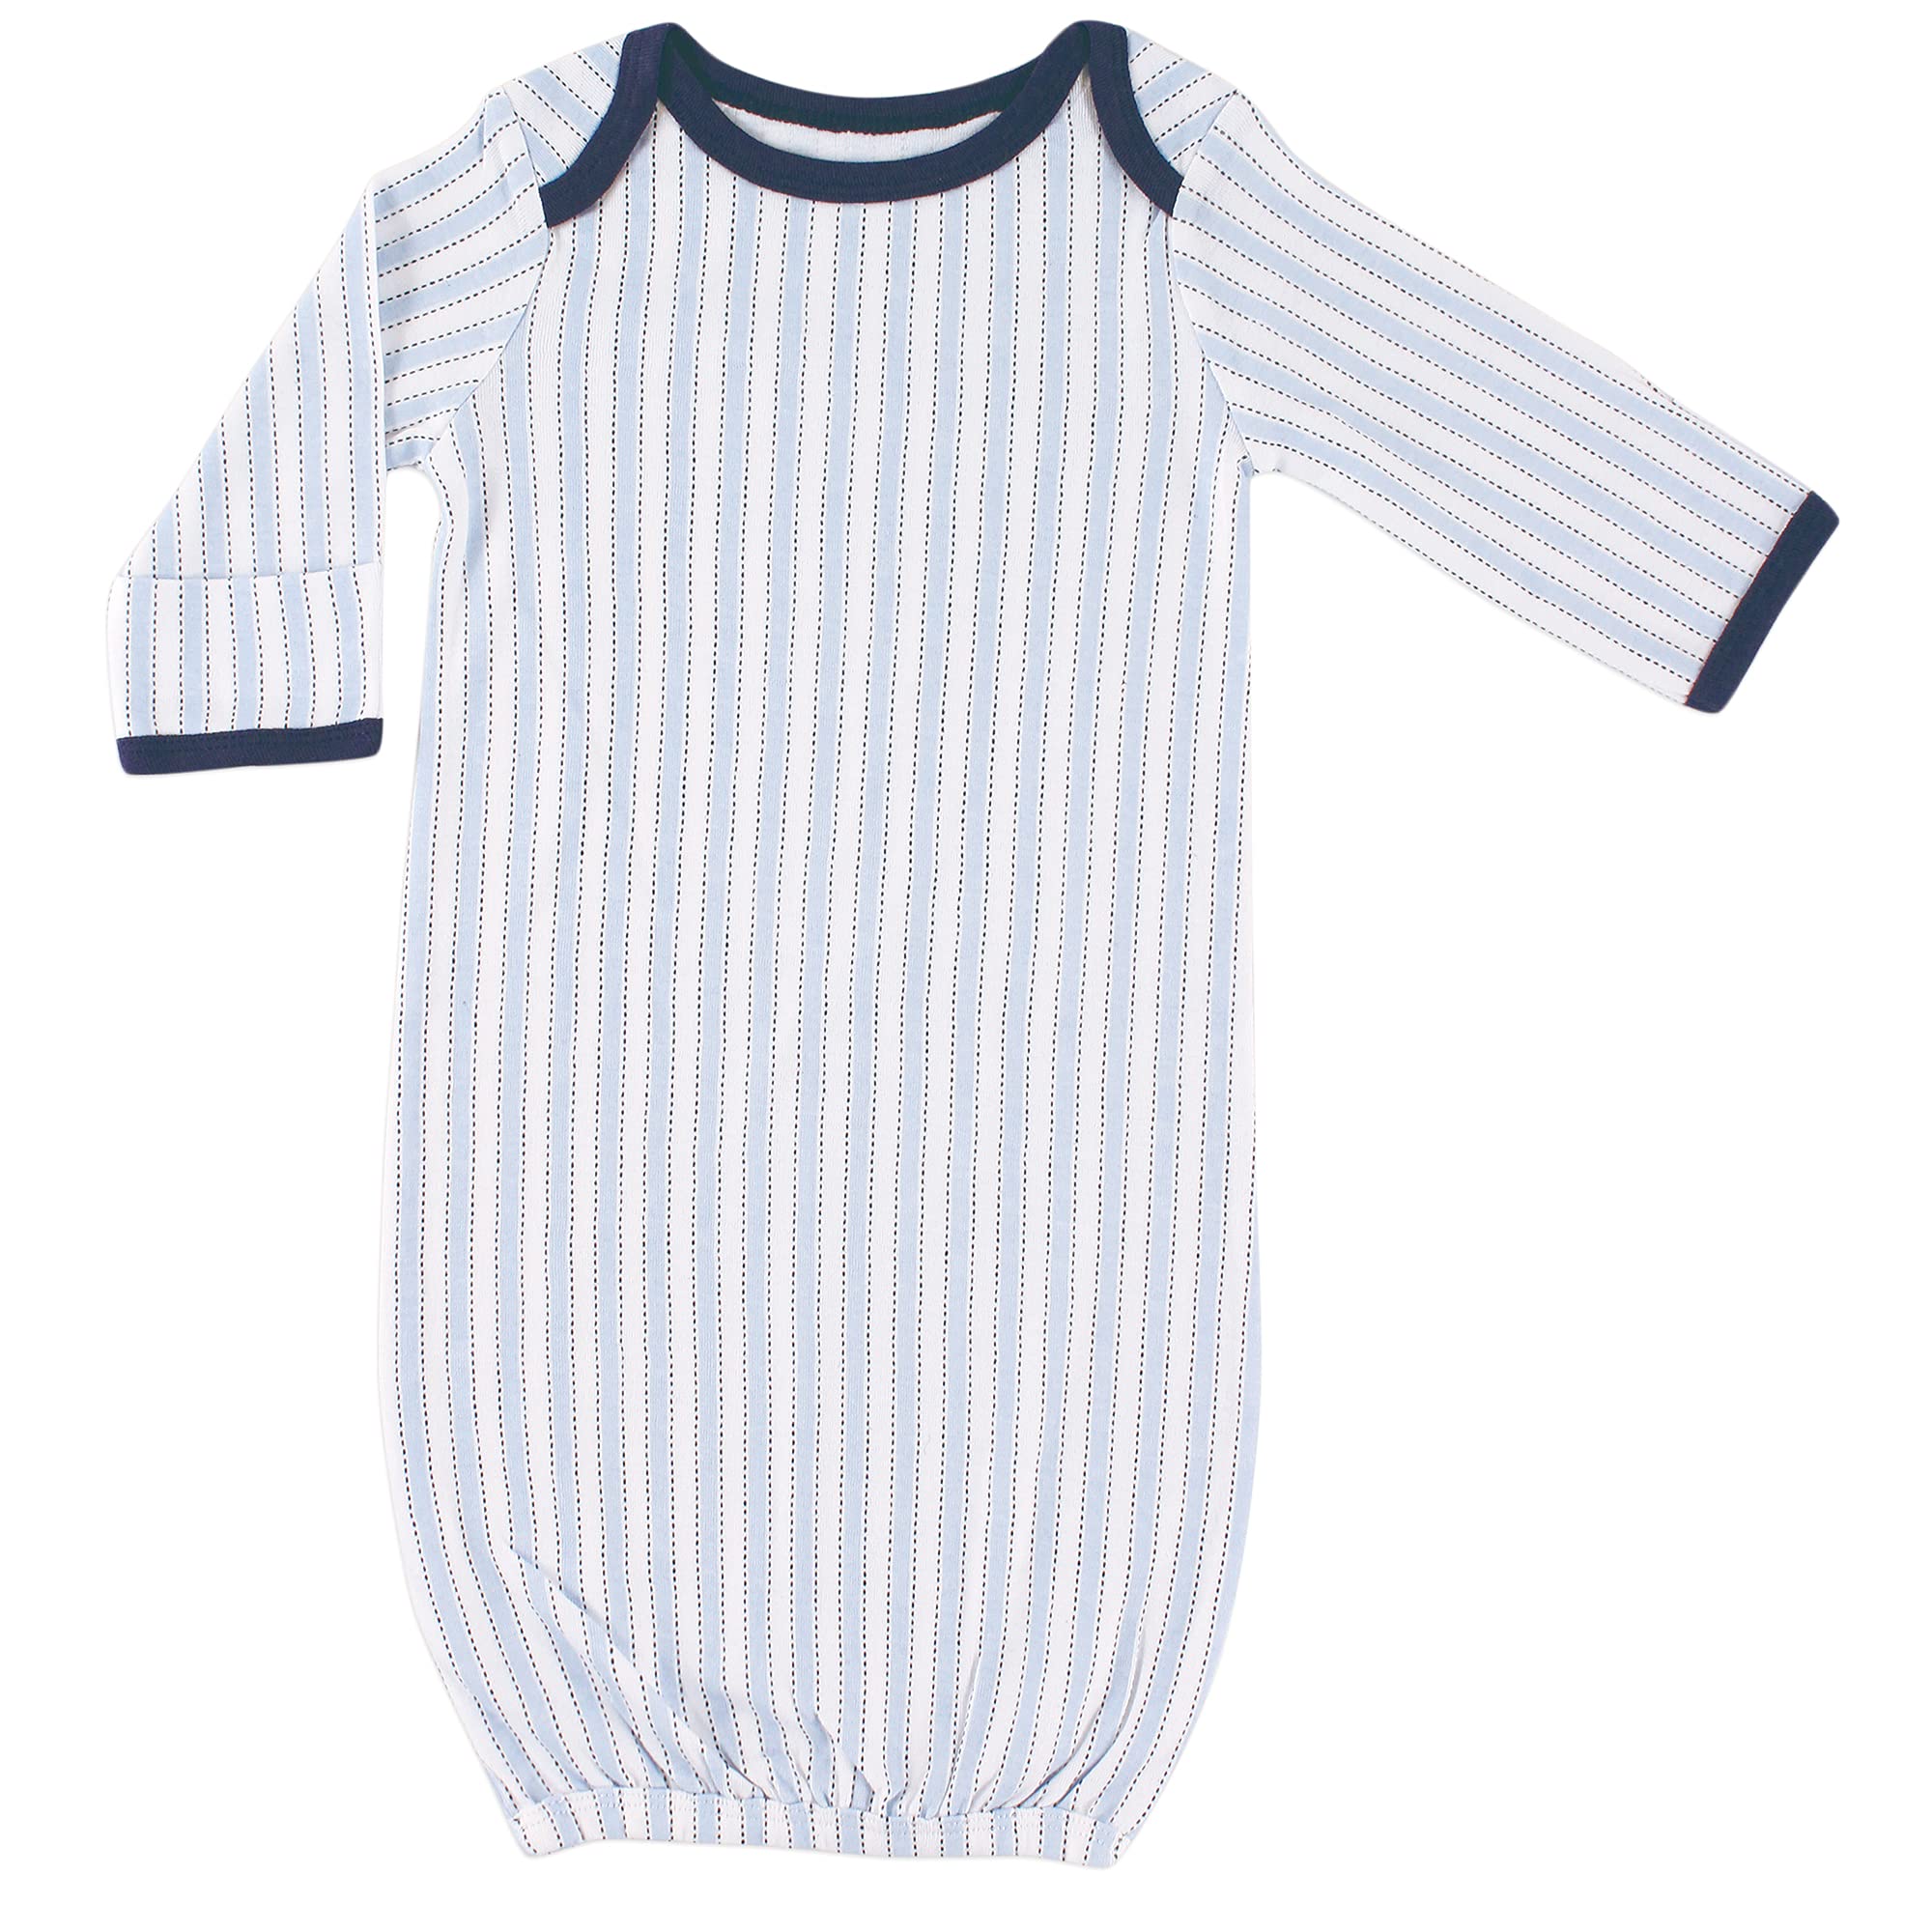 Luvable Friends Baby Girls' Cotton Gowns